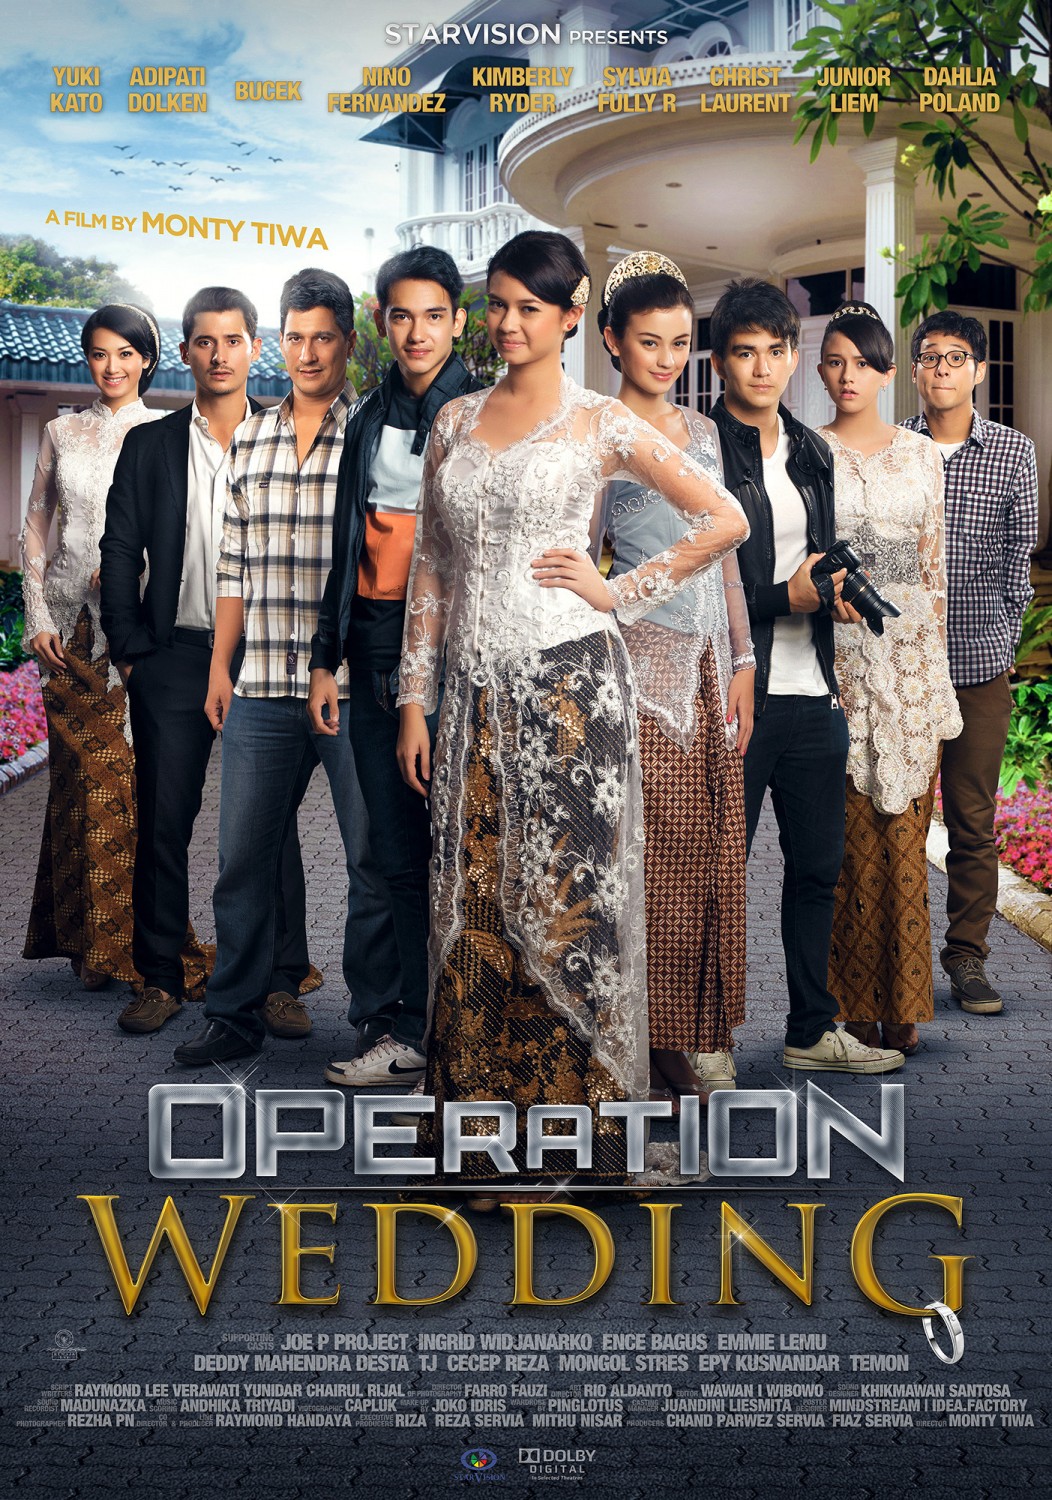 Extra Large Movie Poster Image for Operation Wedding (#2 of 3)